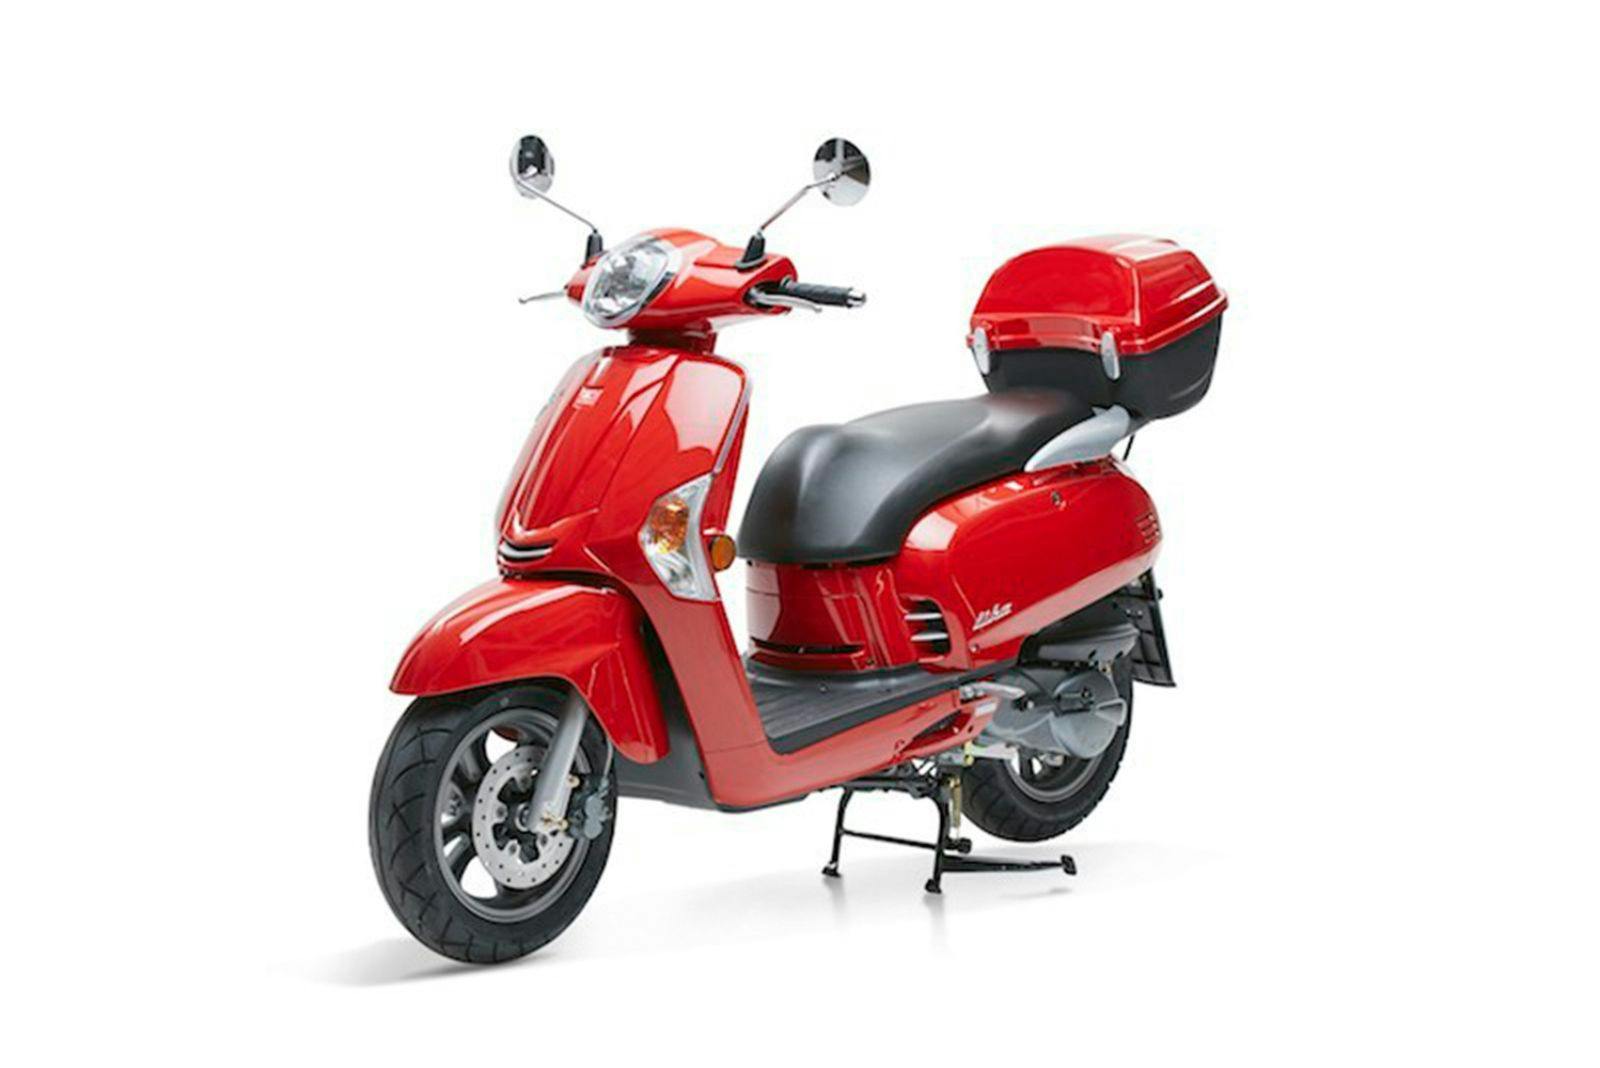 Kymco LIKE 125 in bright red colour, parked